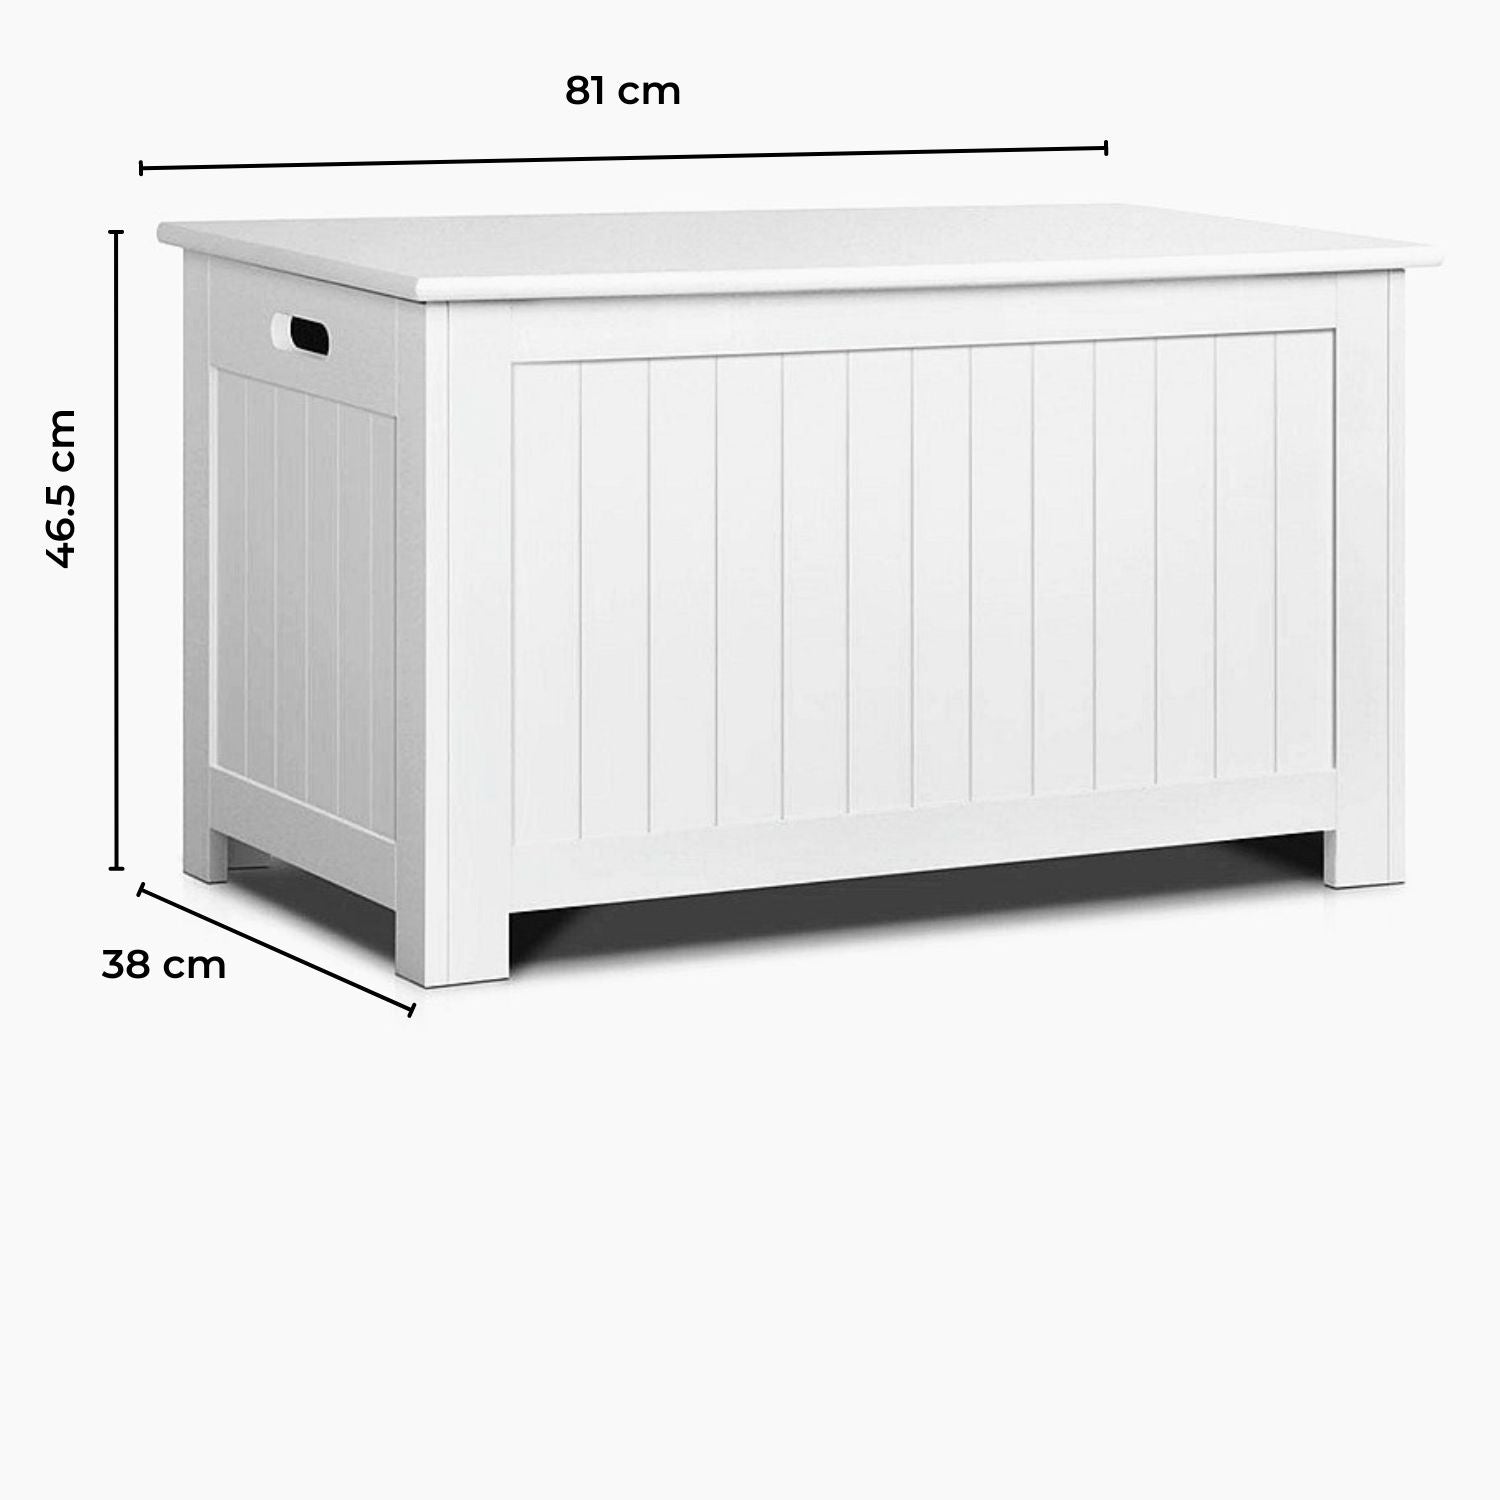 GOMINIMO Kids Toy Storage Box with Lid and Air Gap Handle (White) GO-SBO-100-LR